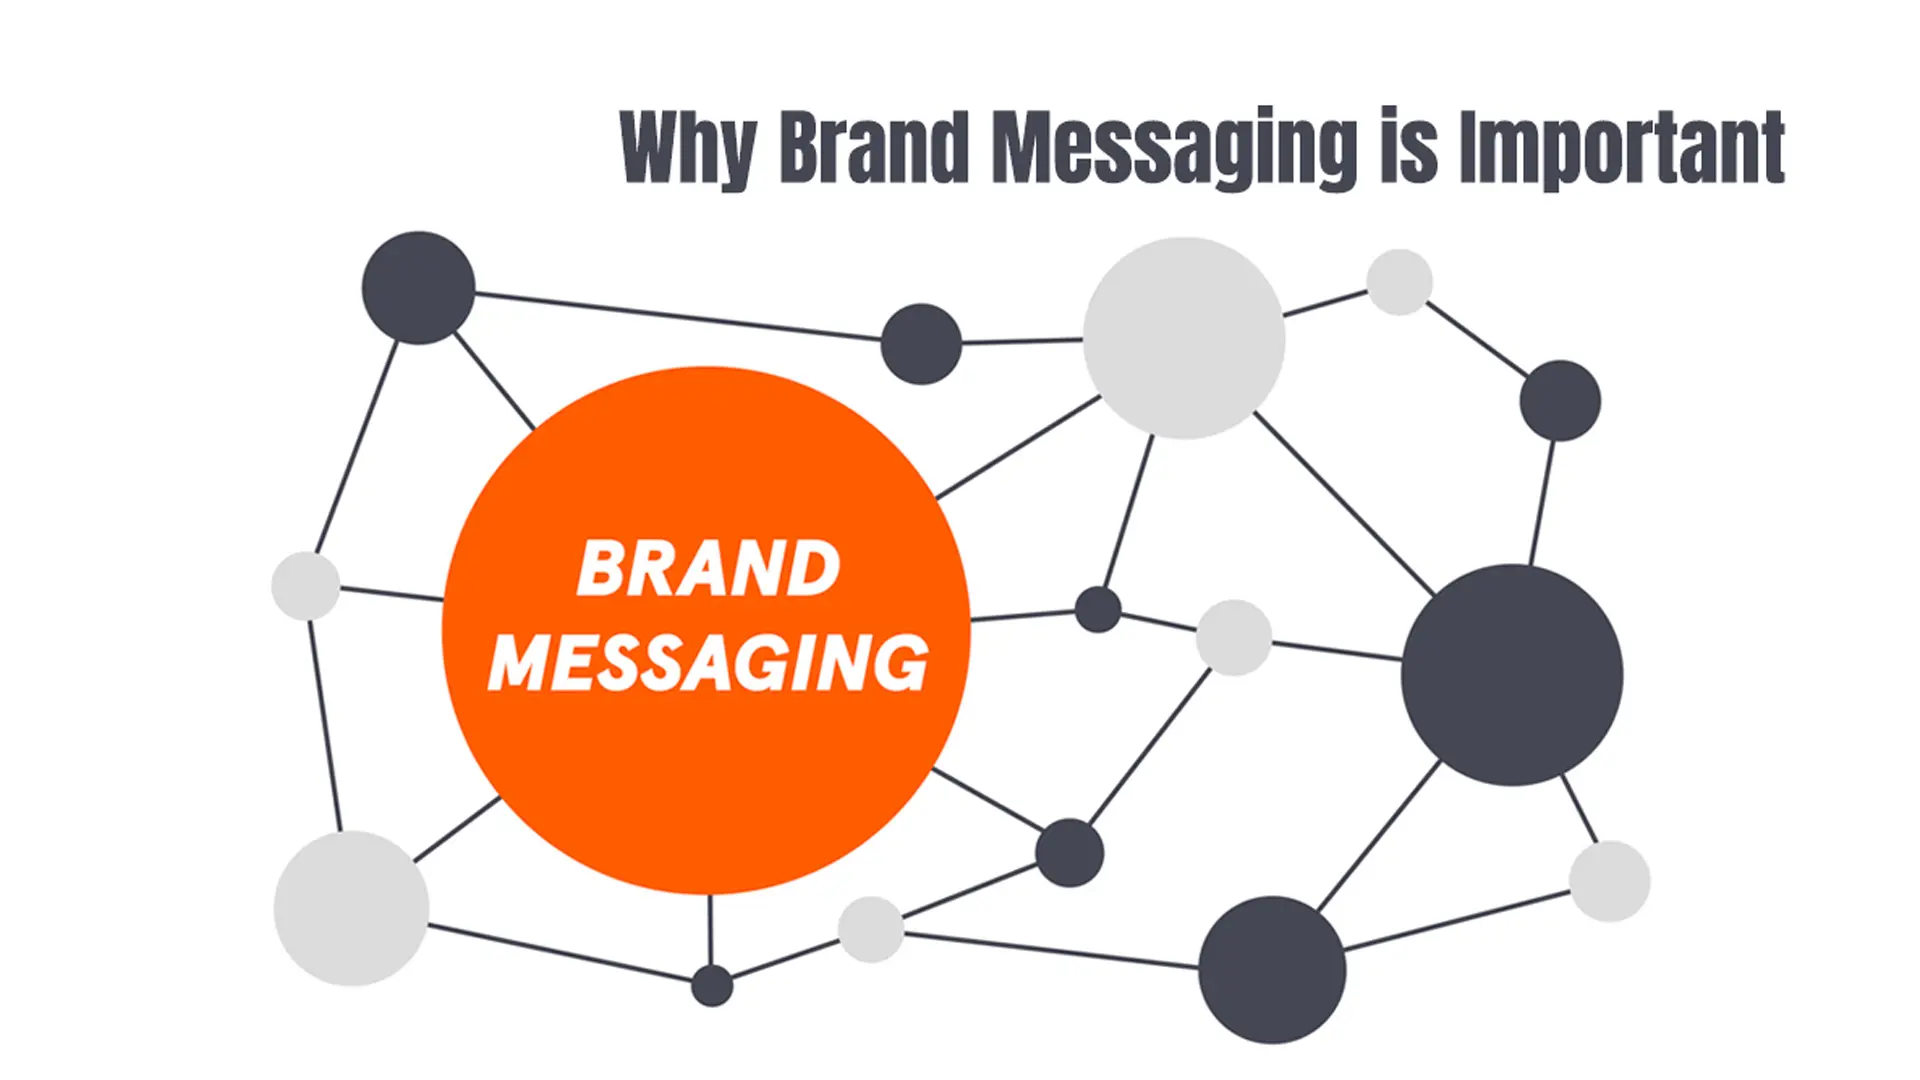 Why Brand Messaging is Important